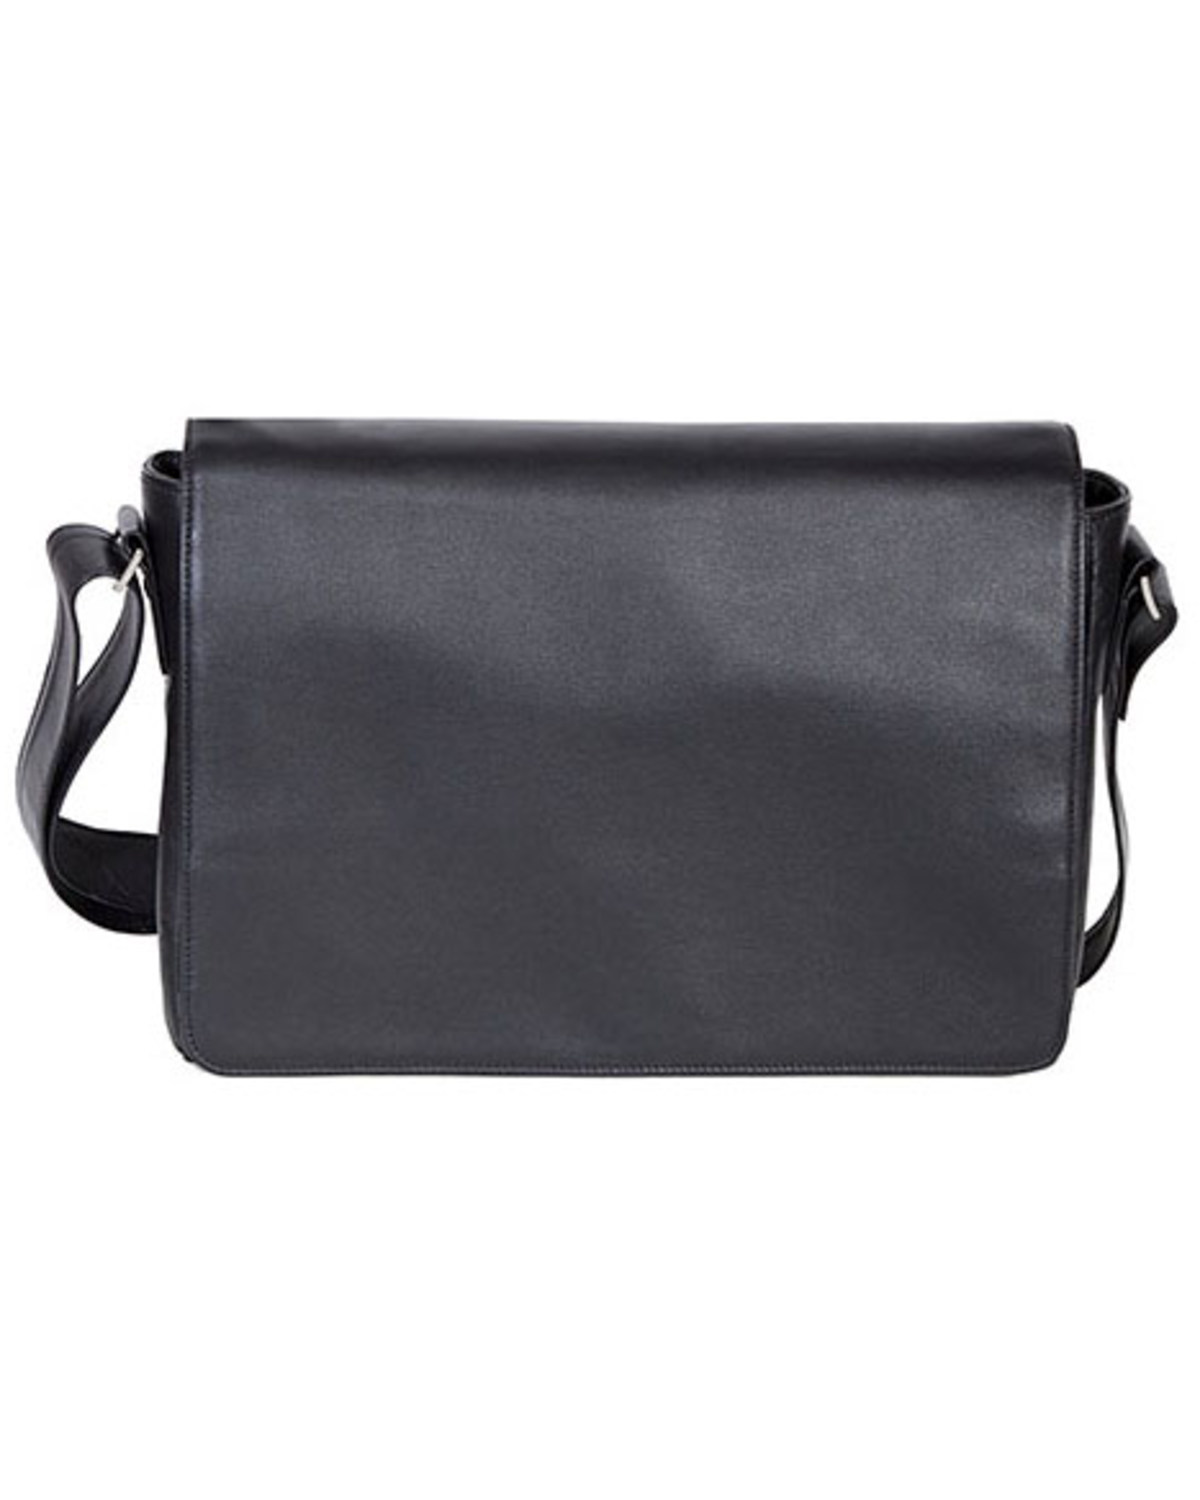 Scully Women's Leather Messenger Bag